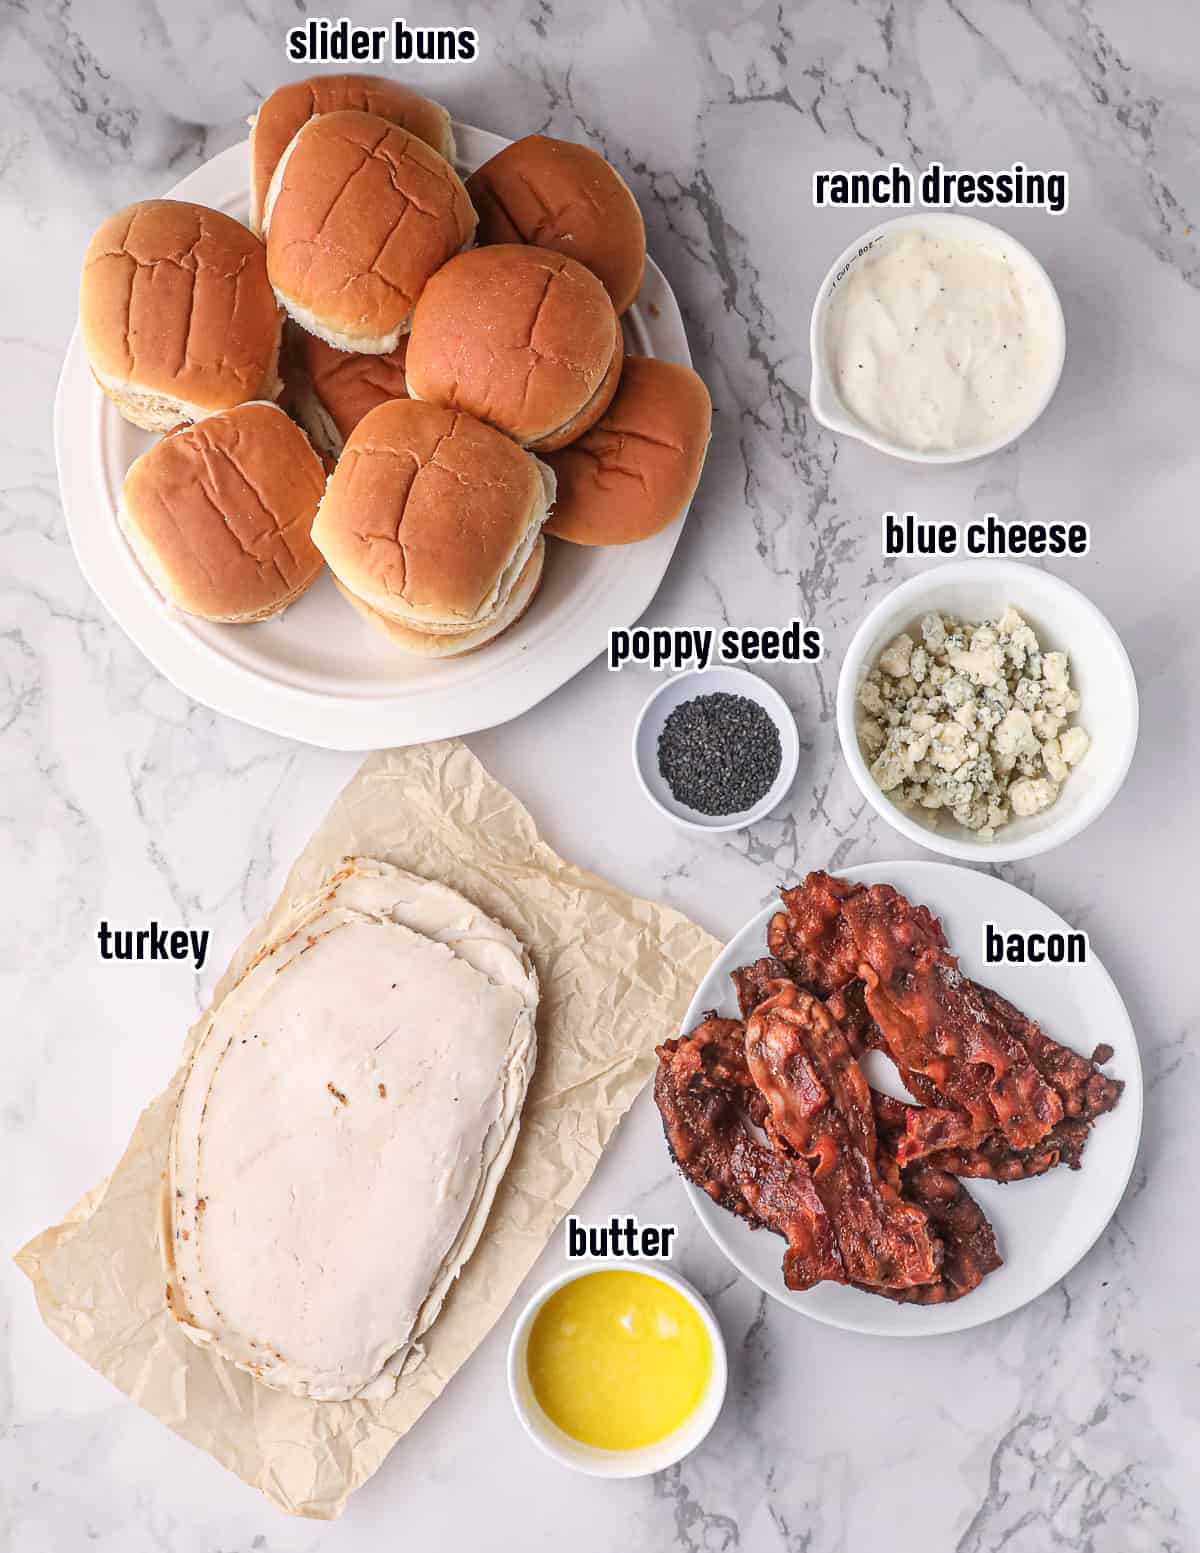 Deli turkey, slider buns, bacon and other ingredients with text.